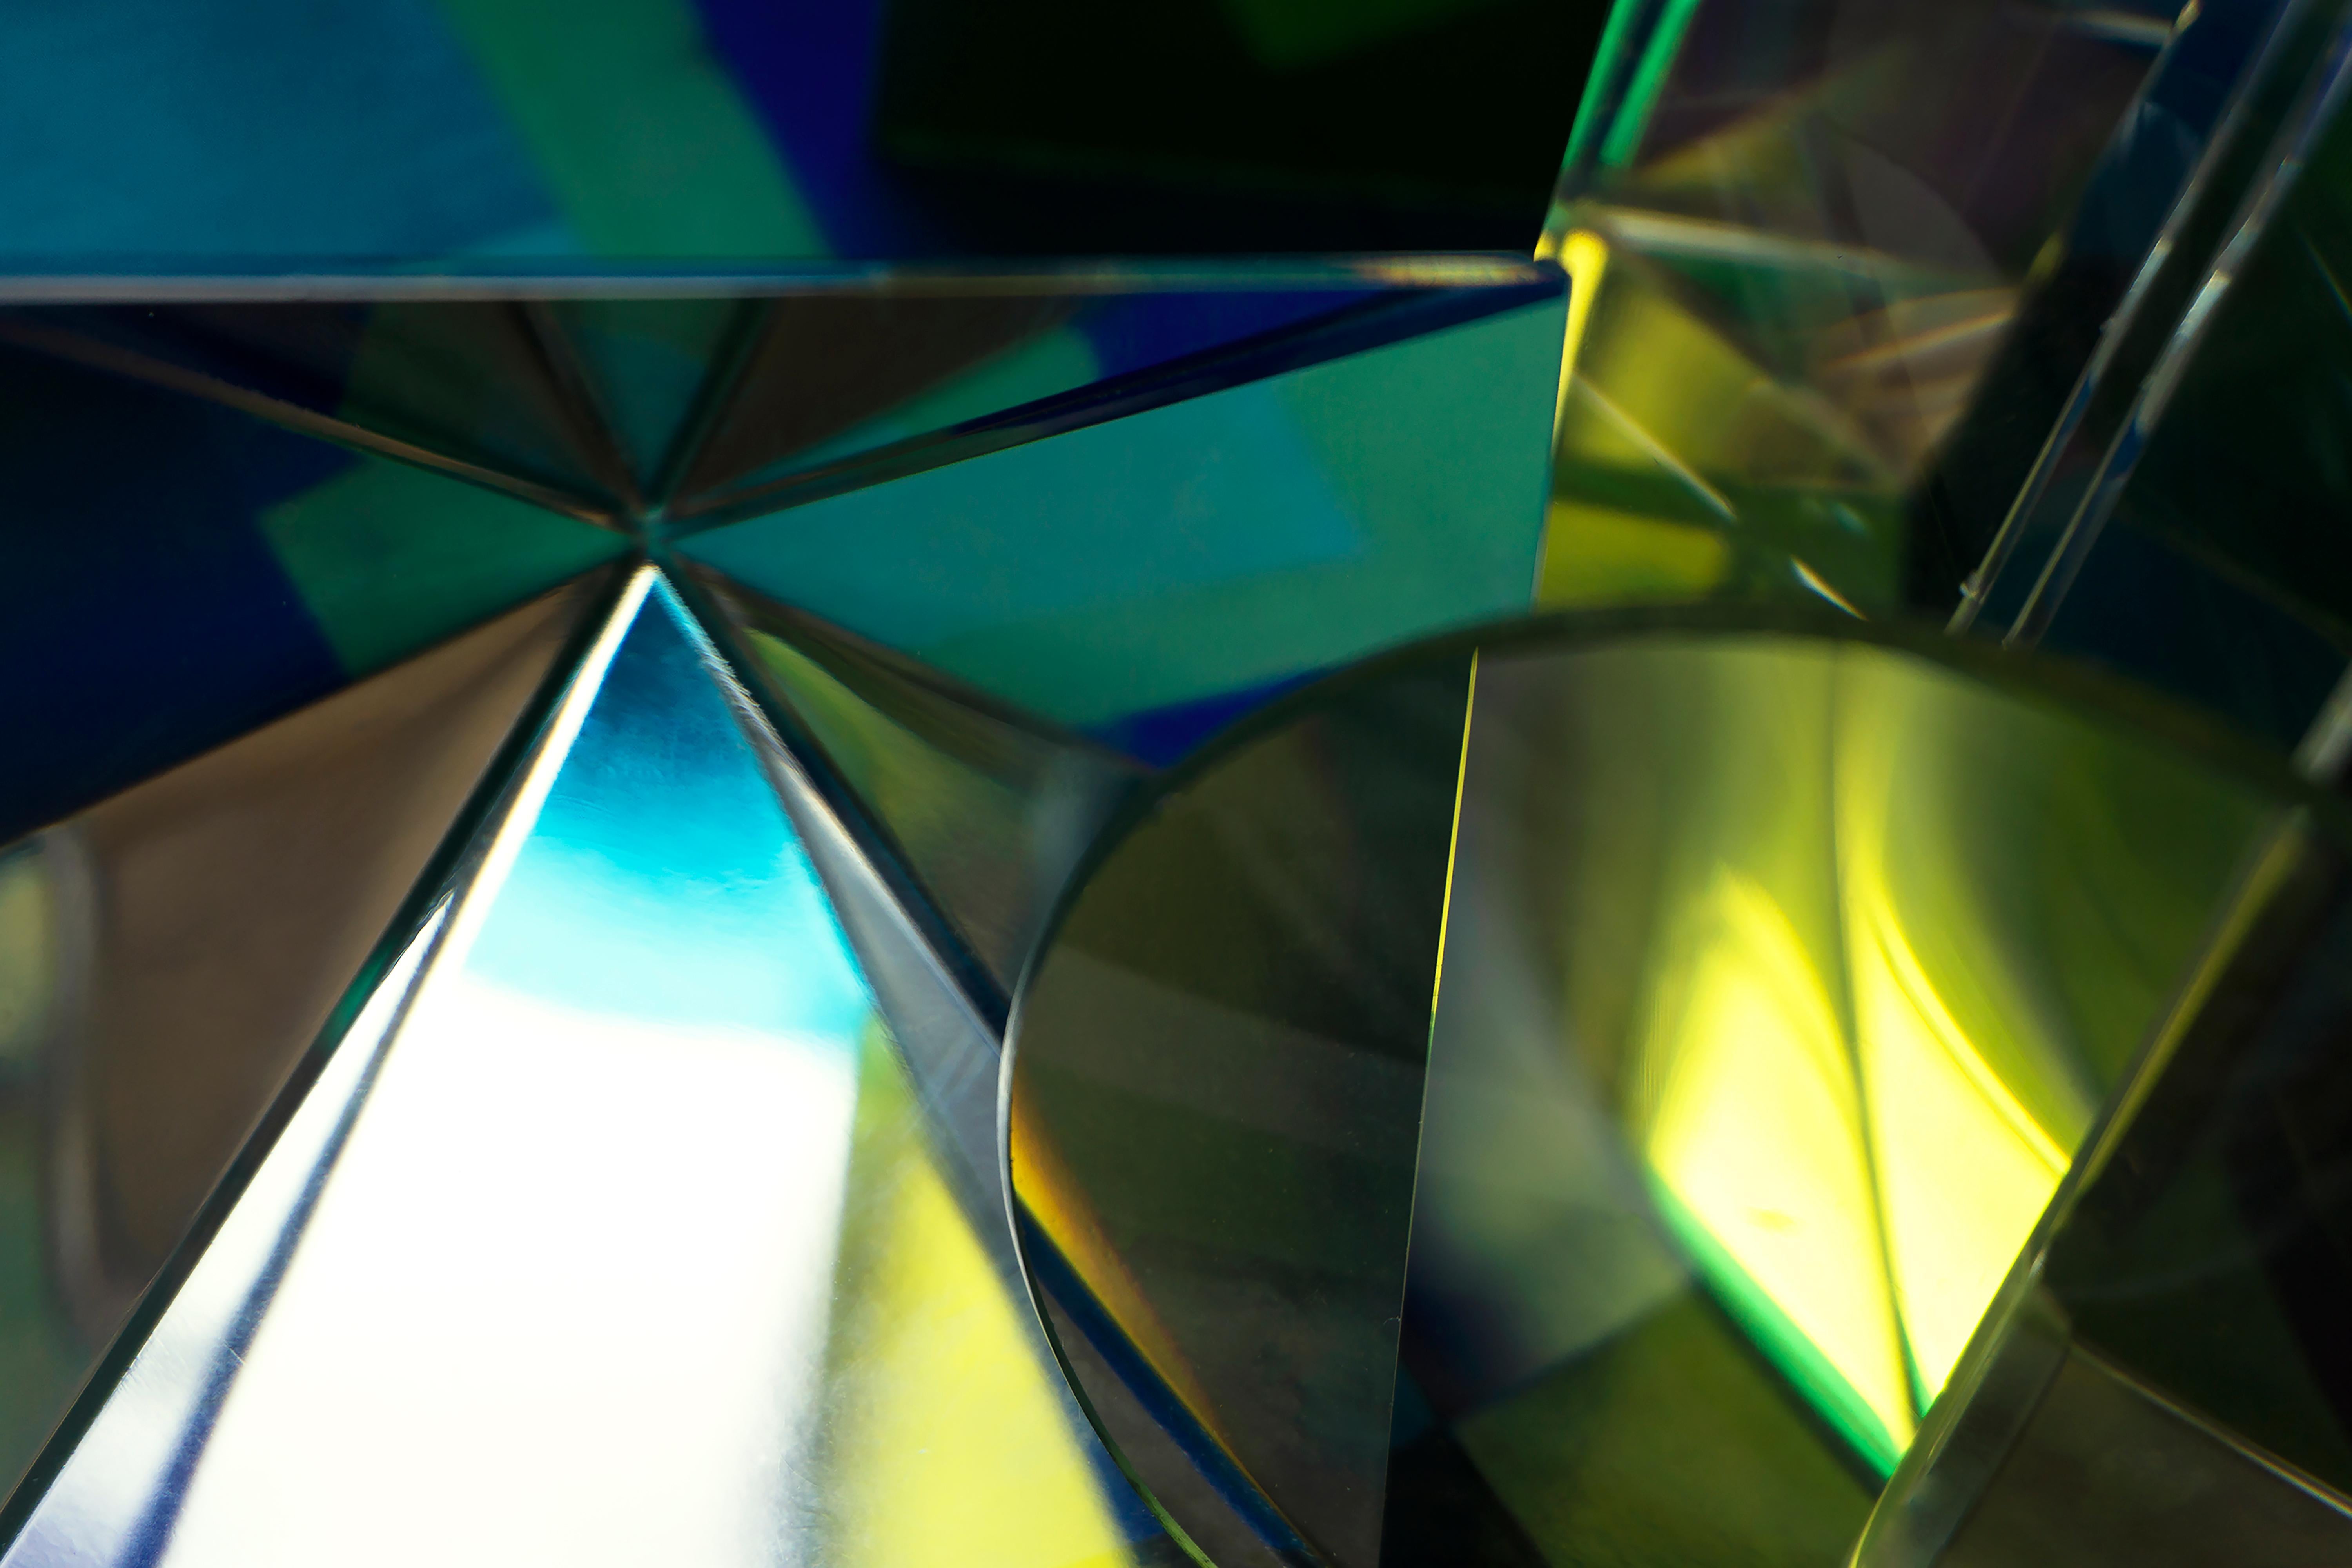 Diane Lachman Color Photograph - Heartbroken: abstract photograph commemorating George Floyd w/ blue green & gold